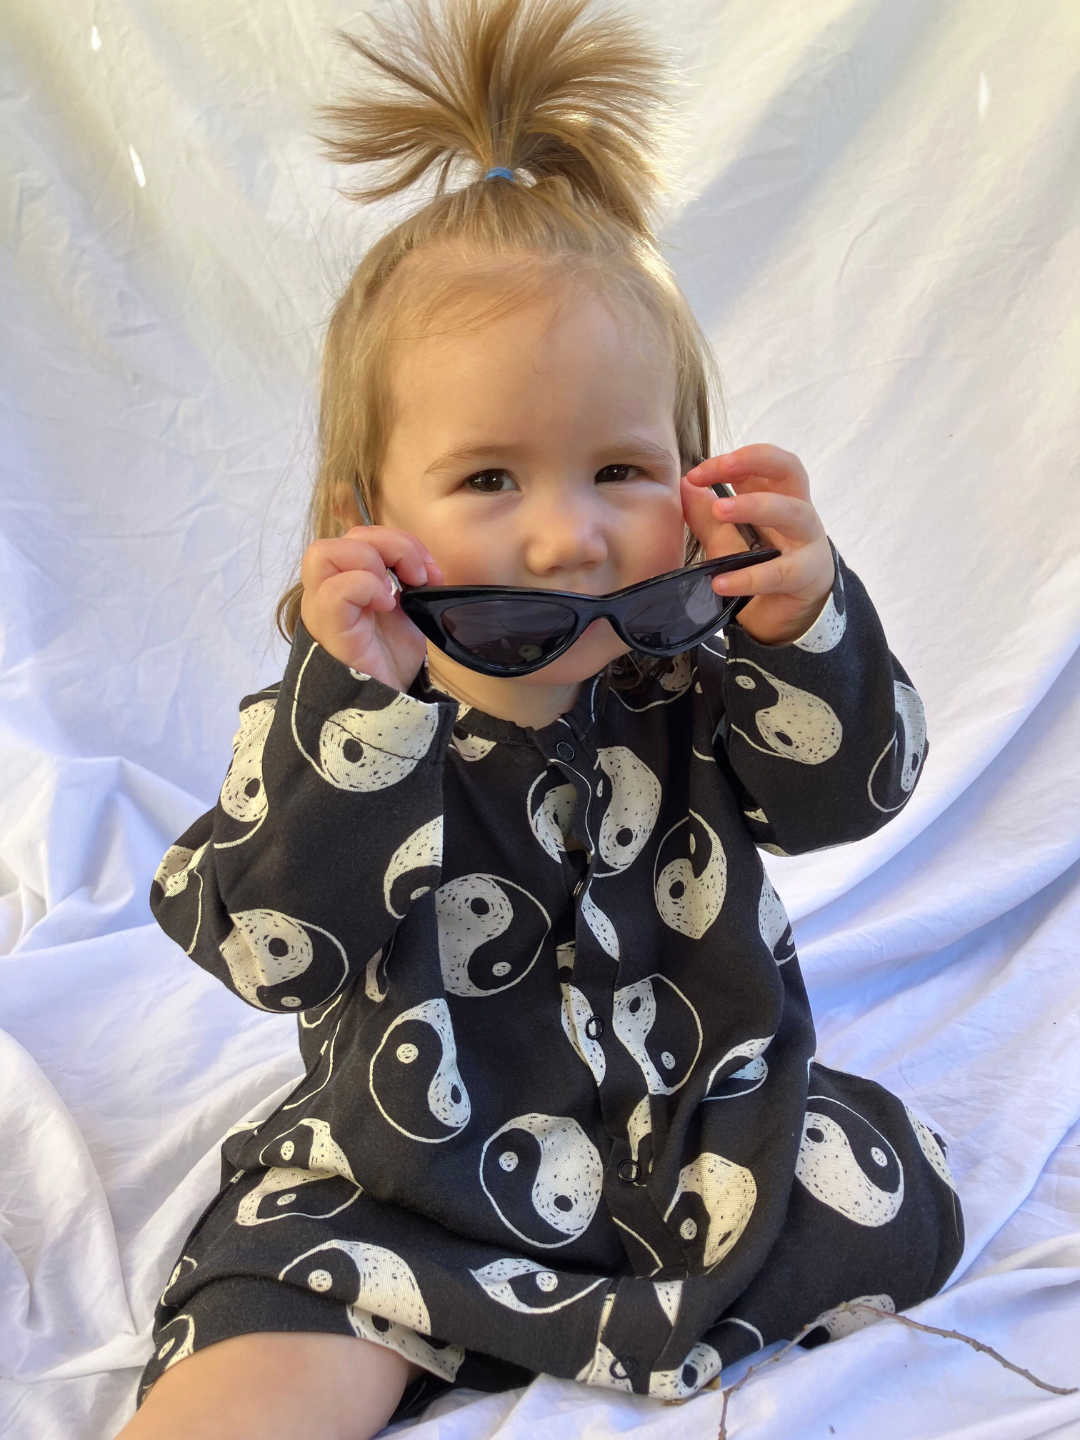 Toddler wearing the Yin Yang Baby Shortie in black cotton printed all over with white hand drawn yin yangs. She is sitting holding black sunglasses, on a white sheet backdrop and wears a top ponytail.